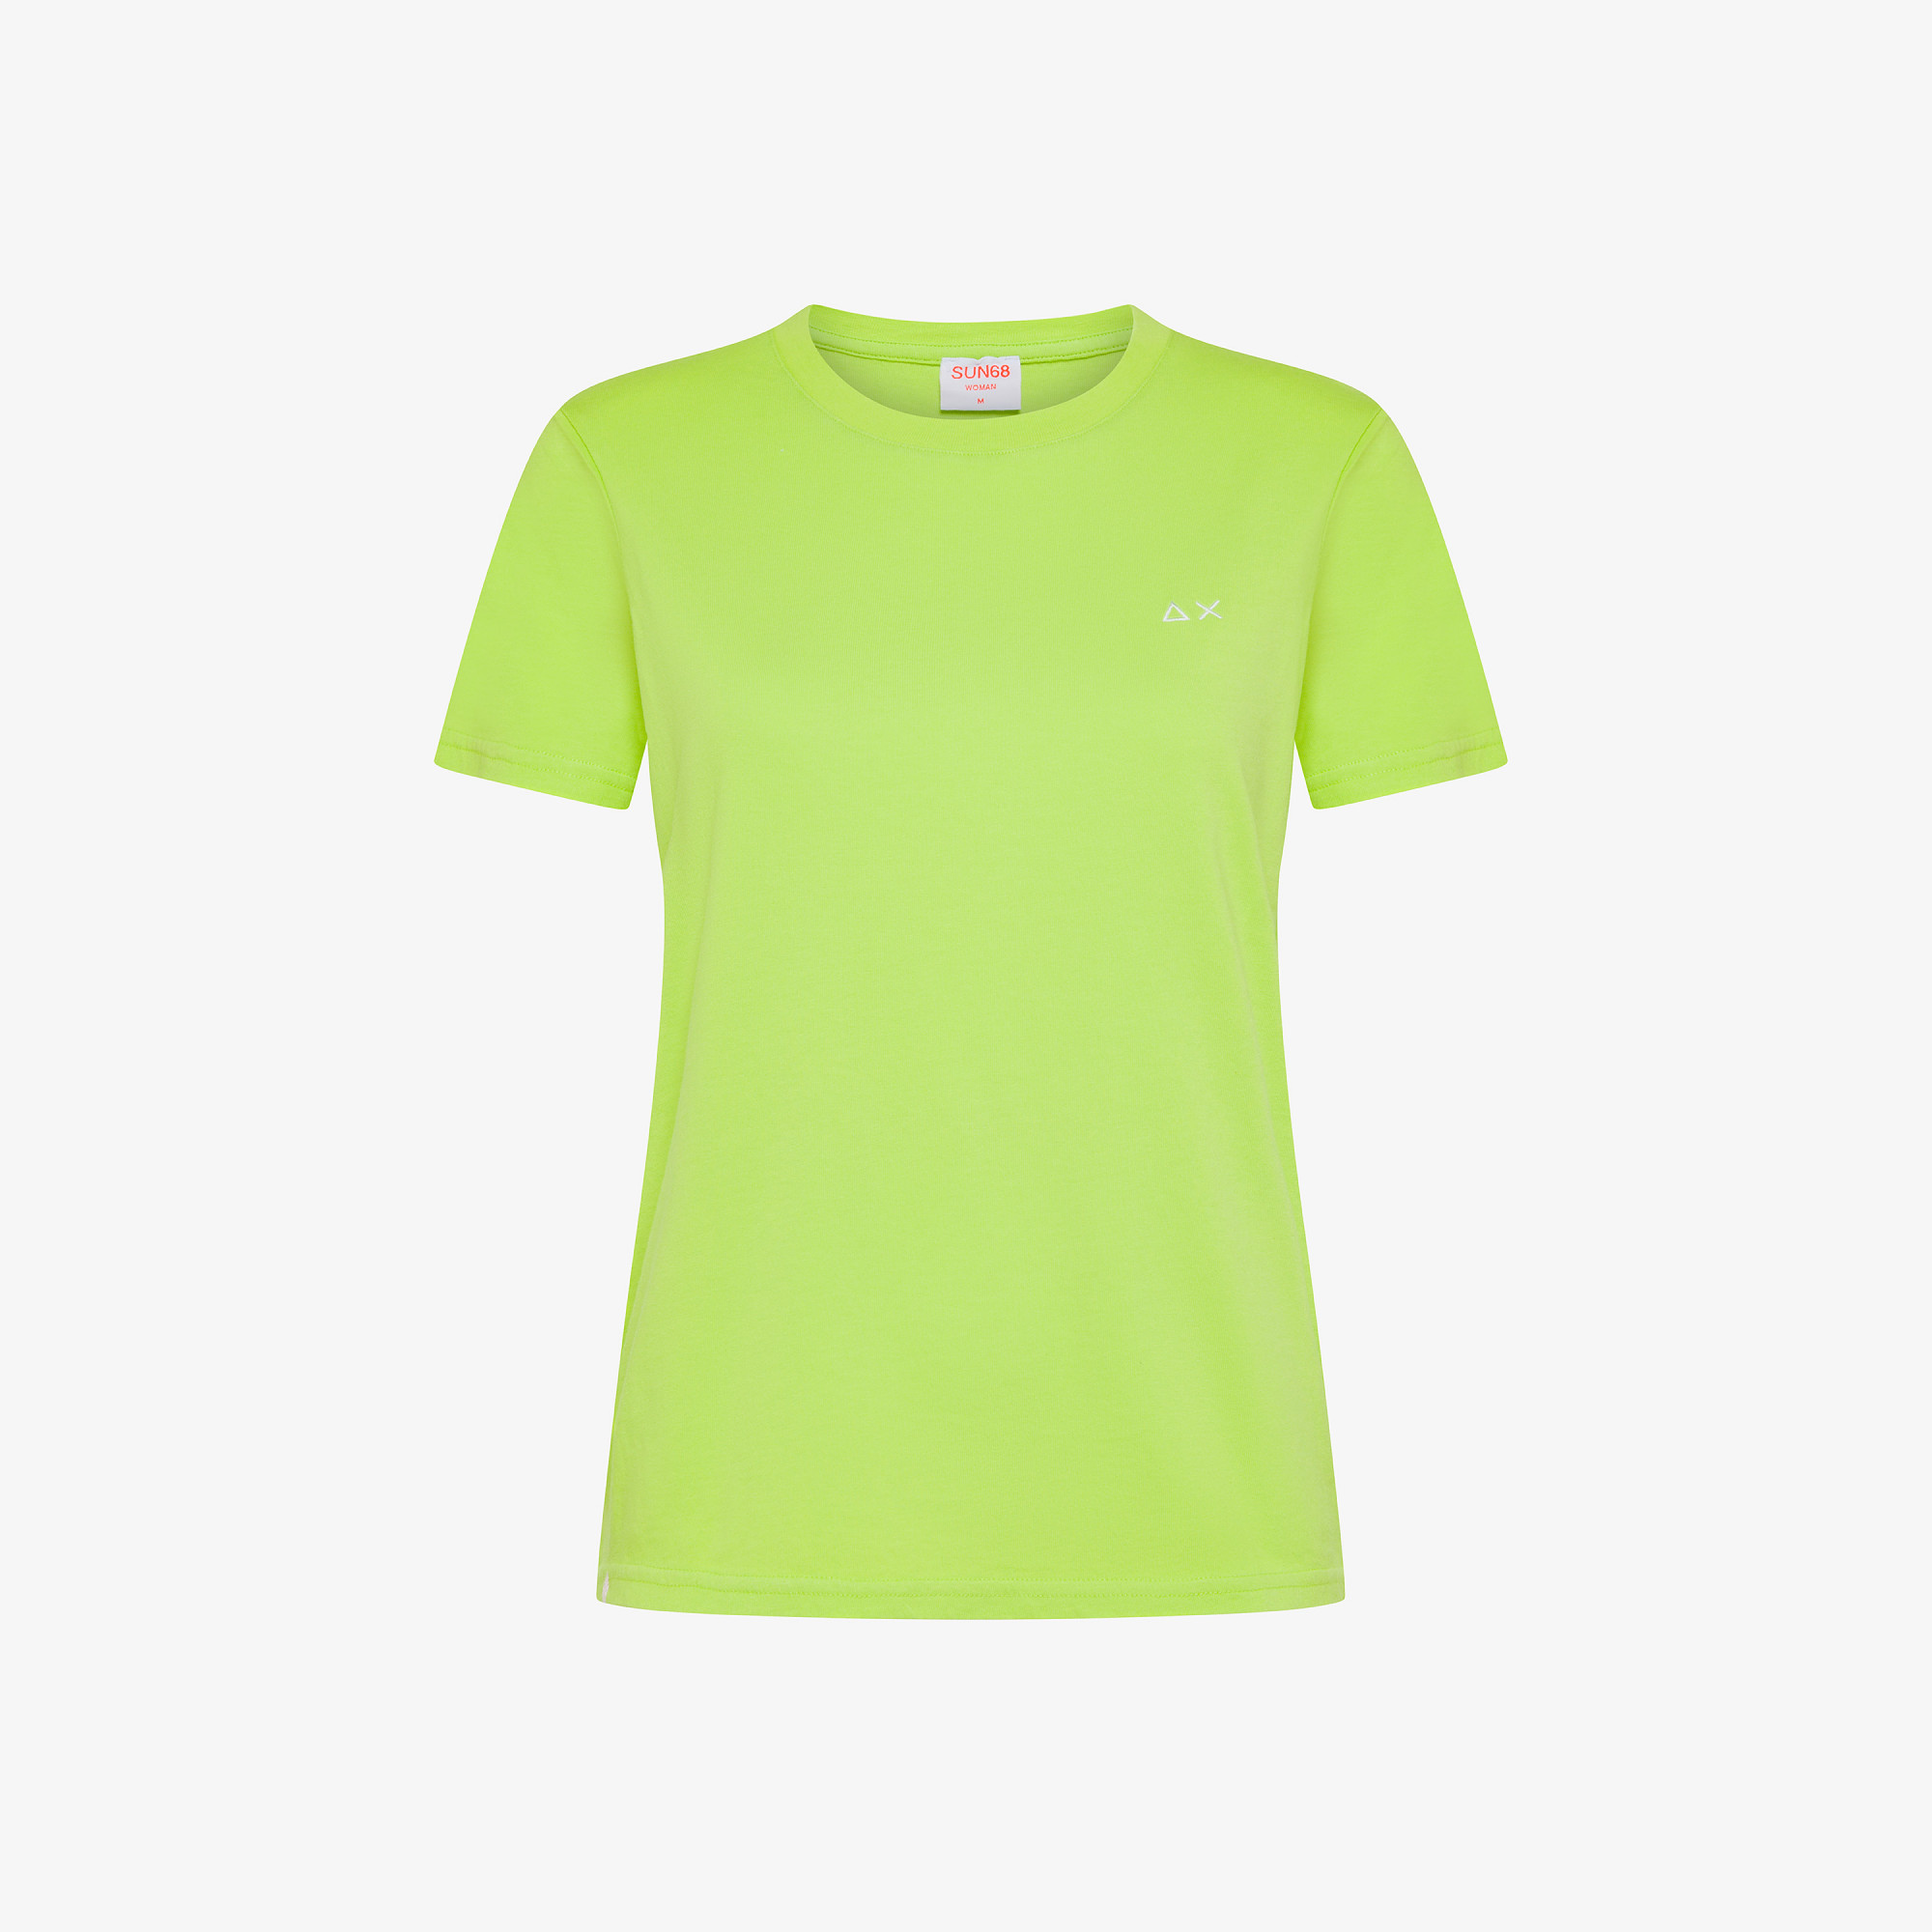 T-SHIRT ROUND NECK S/S LIME